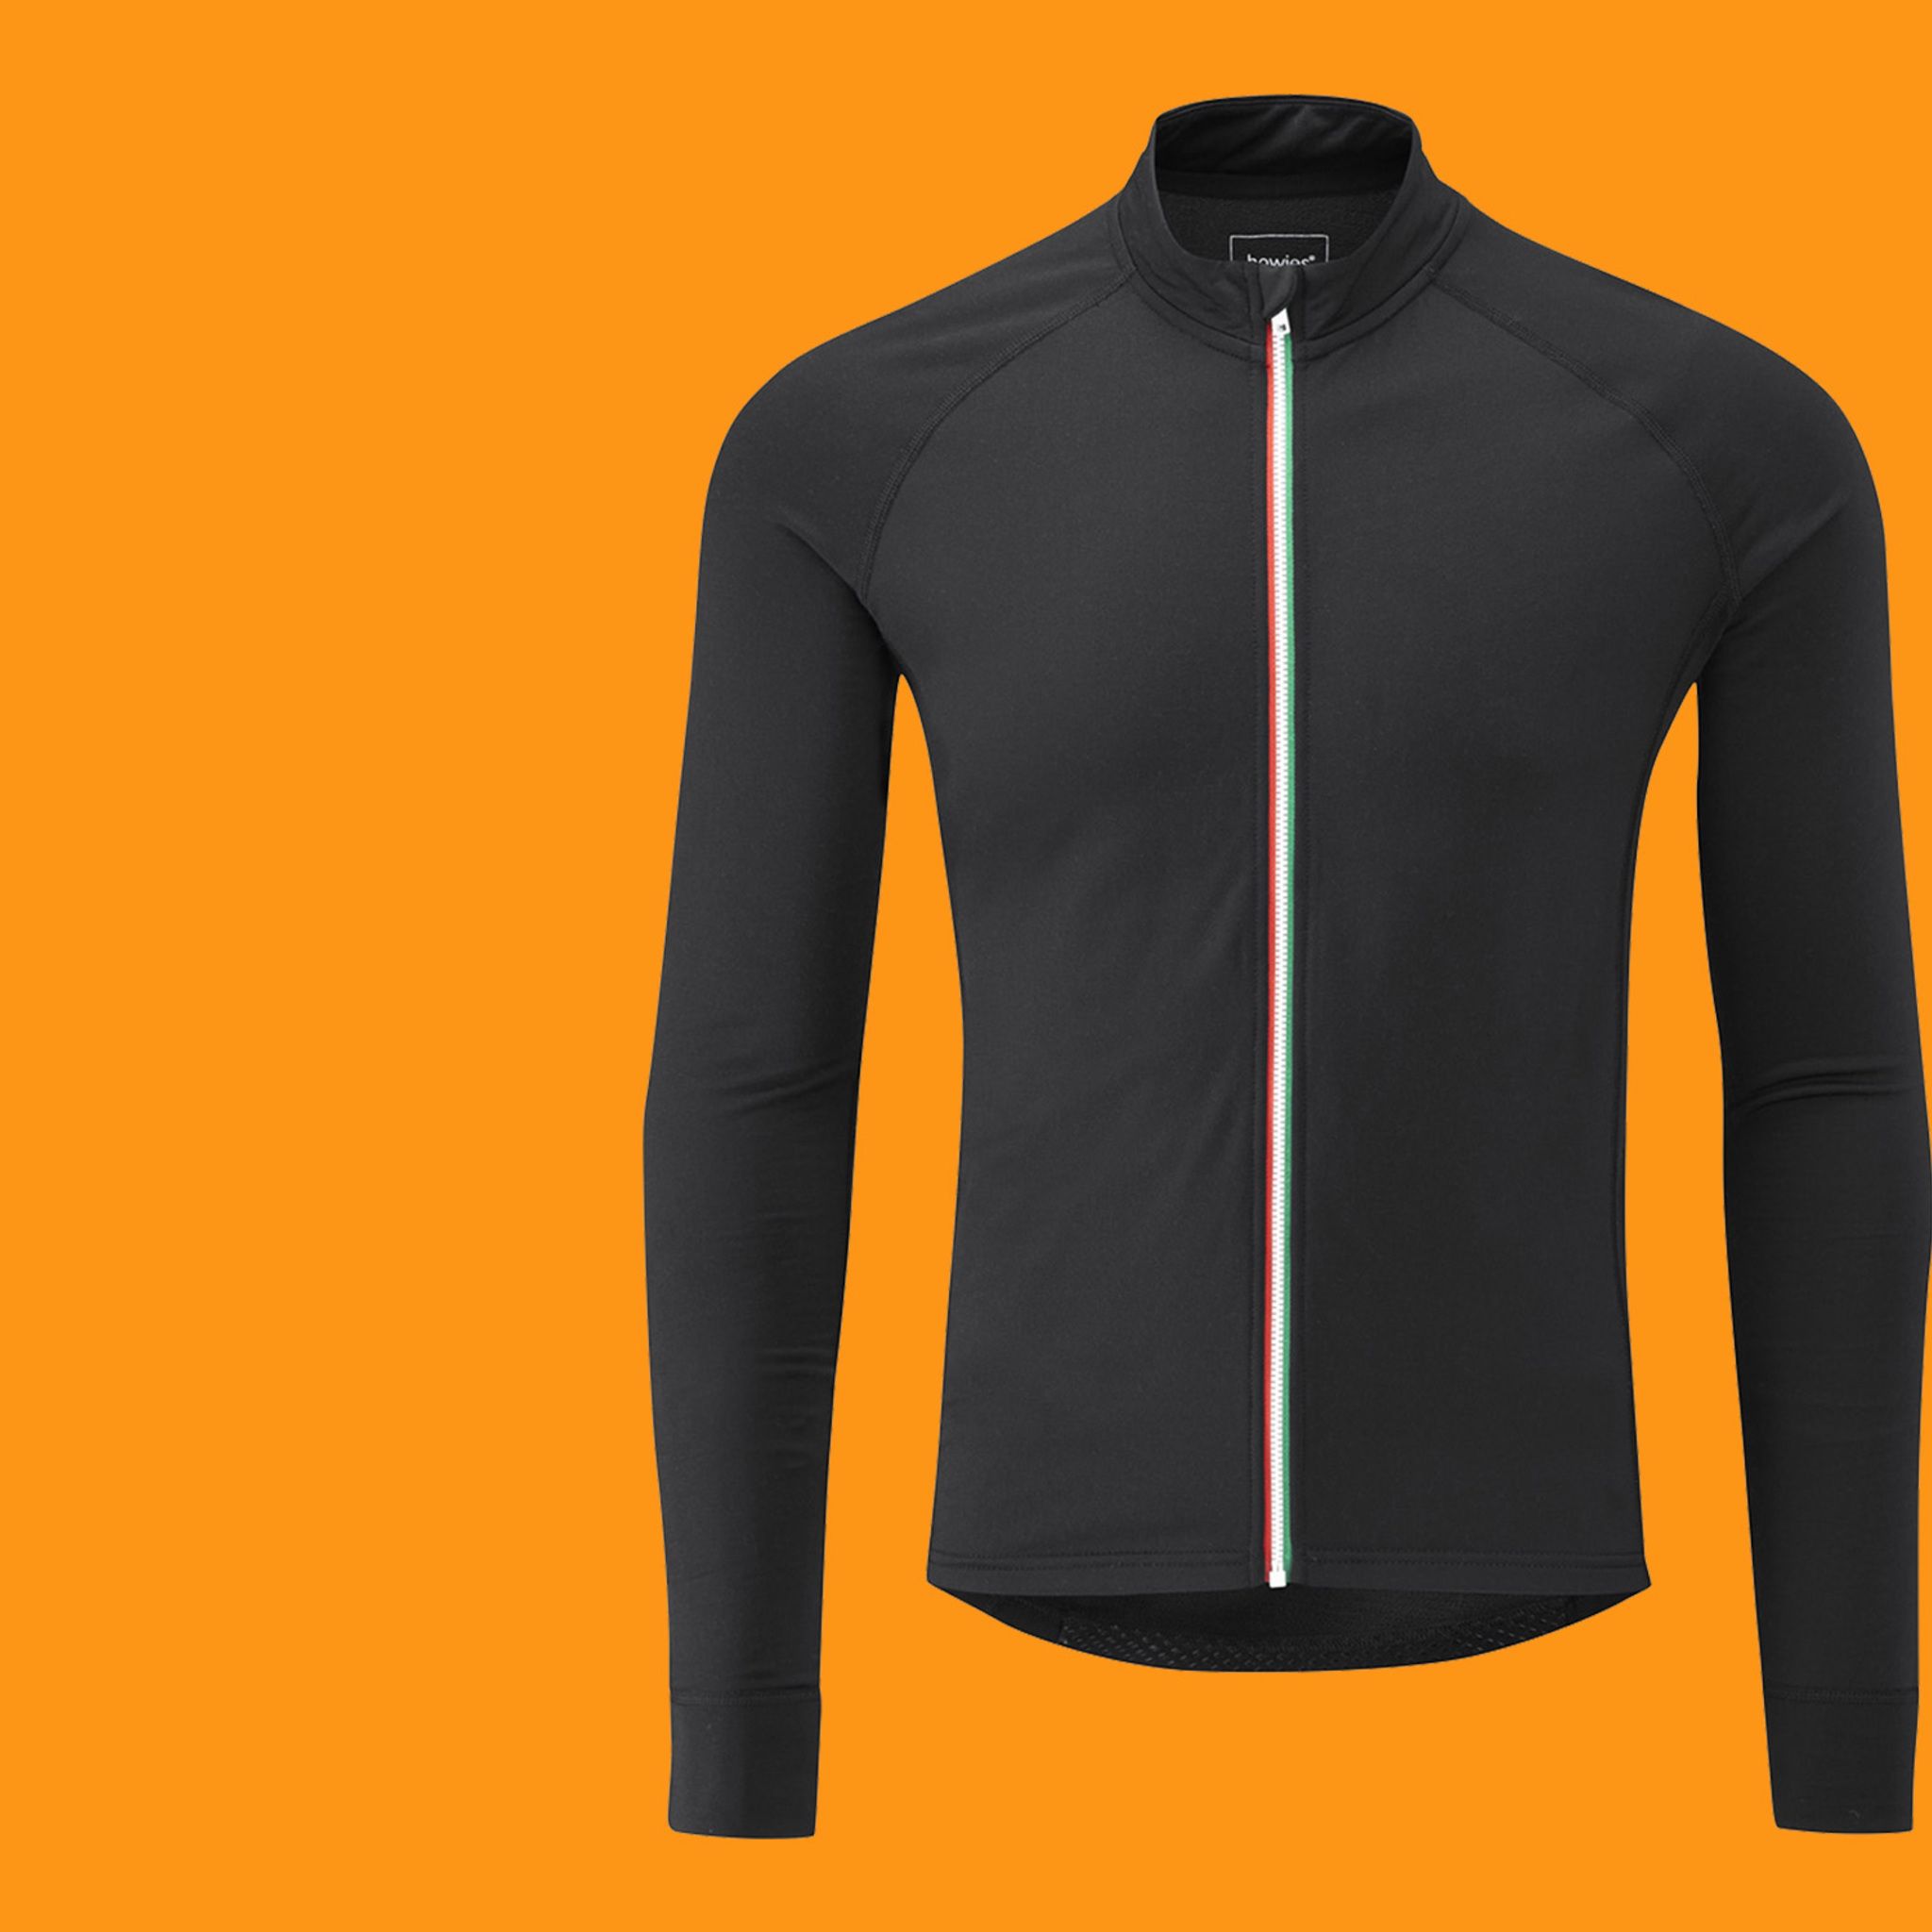 howies cycle clothing